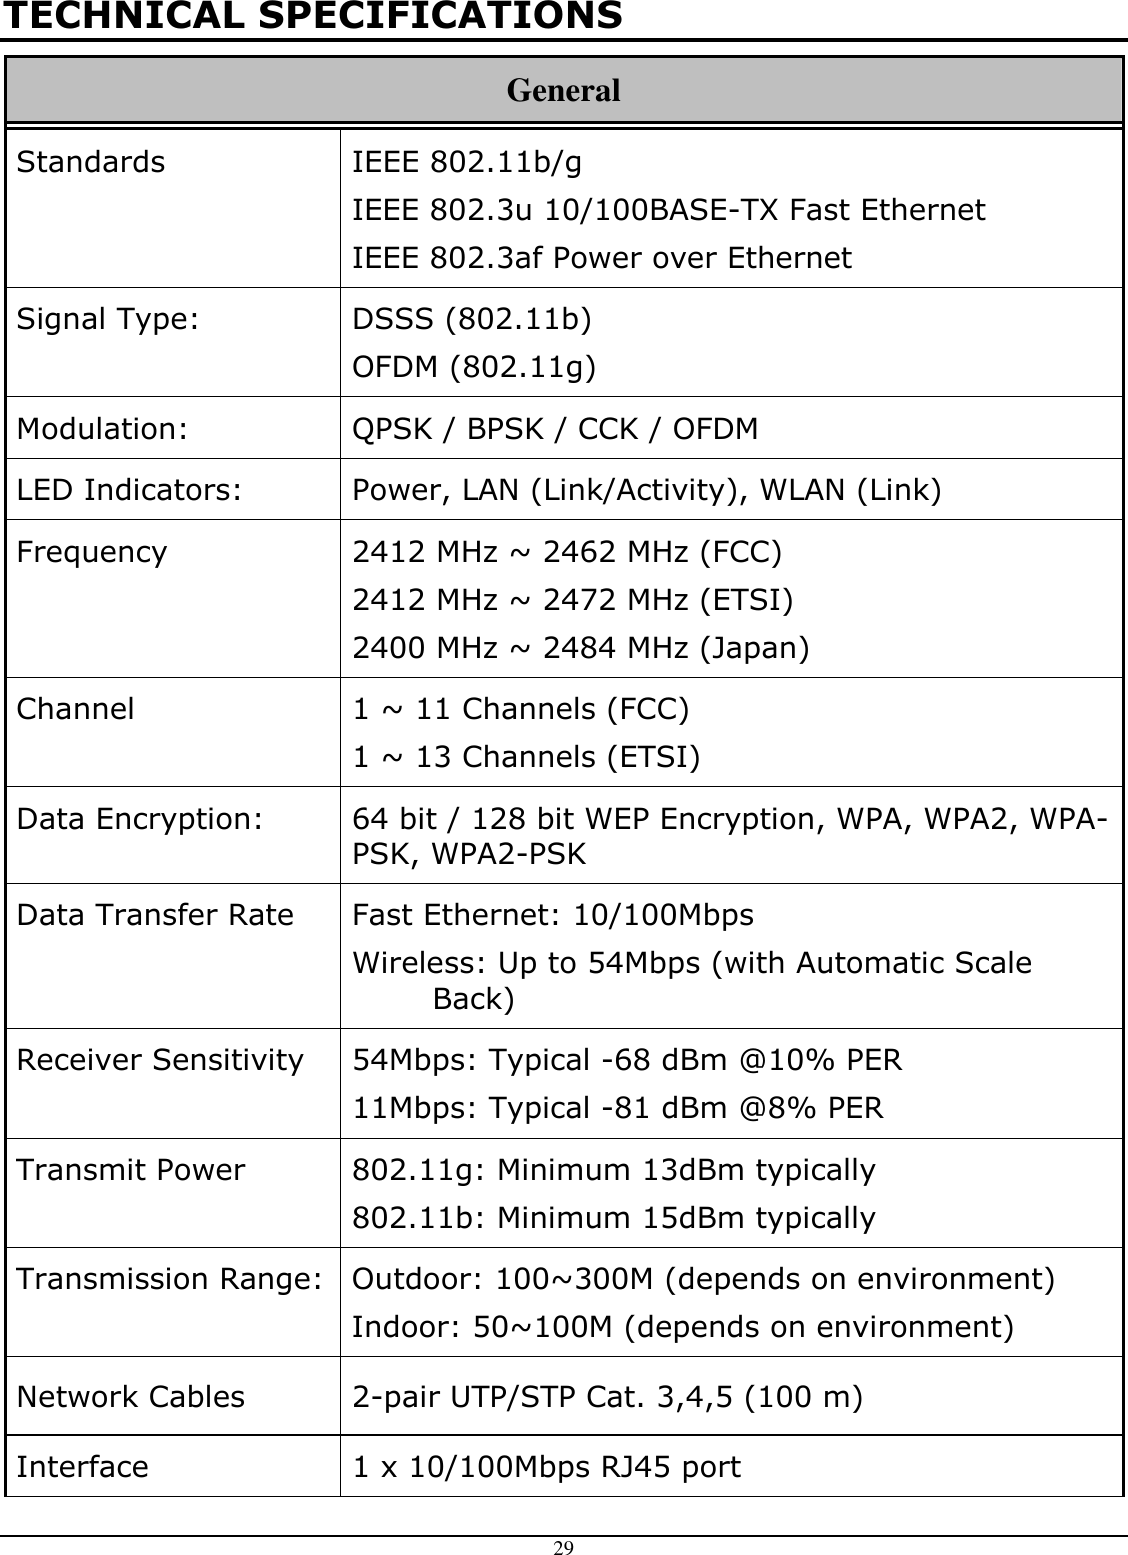  29 TECHNICAL SPECIFICATIONS General Standards  IEEE 802.11b/g IEEE 802.3u 10/100BASE-TX Fast Ethernet IEEE 802.3af Power over Ethernet Signal Type:  DSSS (802.11b) OFDM (802.11g) Modulation:  QPSK / BPSK / CCK / OFDM LED Indicators:  Power, LAN (Link/Activity), WLAN (Link) Frequency  2412 MHz ~ 2462 MHz (FCC) 2412 MHz ~ 2472 MHz (ETSI) 2400 MHz ~ 2484 MHz (Japan) Channel  1 ~ 11 Channels (FCC) 1 ~ 13 Channels (ETSI) Data Encryption:  64 bit / 128 bit WEP Encryption, WPA, WPA2, WPA-PSK, WPA2-PSK Data Transfer Rate  Fast Ethernet: 10/100Mbps  Wireless: Up to 54Mbps (with Automatic Scale Back) Receiver Sensitivity  54Mbps: Typical -68 dBm @10% PER 11Mbps: Typical -81 dBm @8% PER Transmit Power  802.11g: Minimum 13dBm typically 802.11b: Minimum 15dBm typically Transmission Range: Outdoor: 100~300M (depends on environment) Indoor: 50~100M (depends on environment) Network Cables  2-pair UTP/STP Cat. 3,4,5 (100 m) Interface  1 x 10/100Mbps RJ45 port 